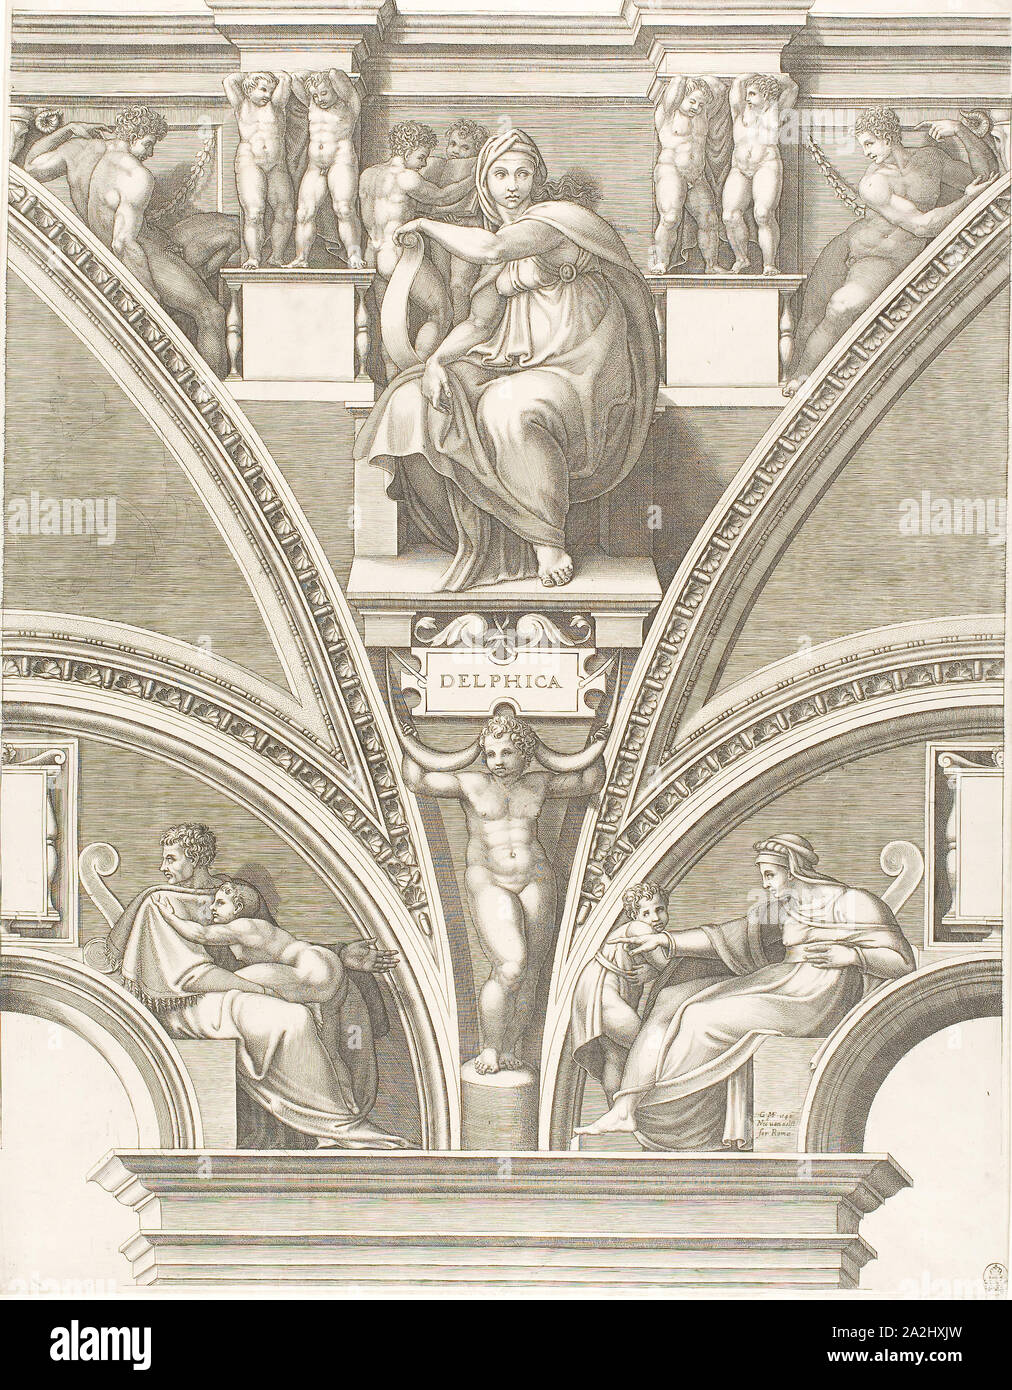 The Delphic Sibyl, early 1570s, Giorgio Ghisi (Italian, 1520-1582), after Michelangelo (Italian, 1475-1564), Italy, Engraving in black on ivory laid paper, 565.5 x 432 mm (plate), 570 x 439 mm (sheet Stock Photo